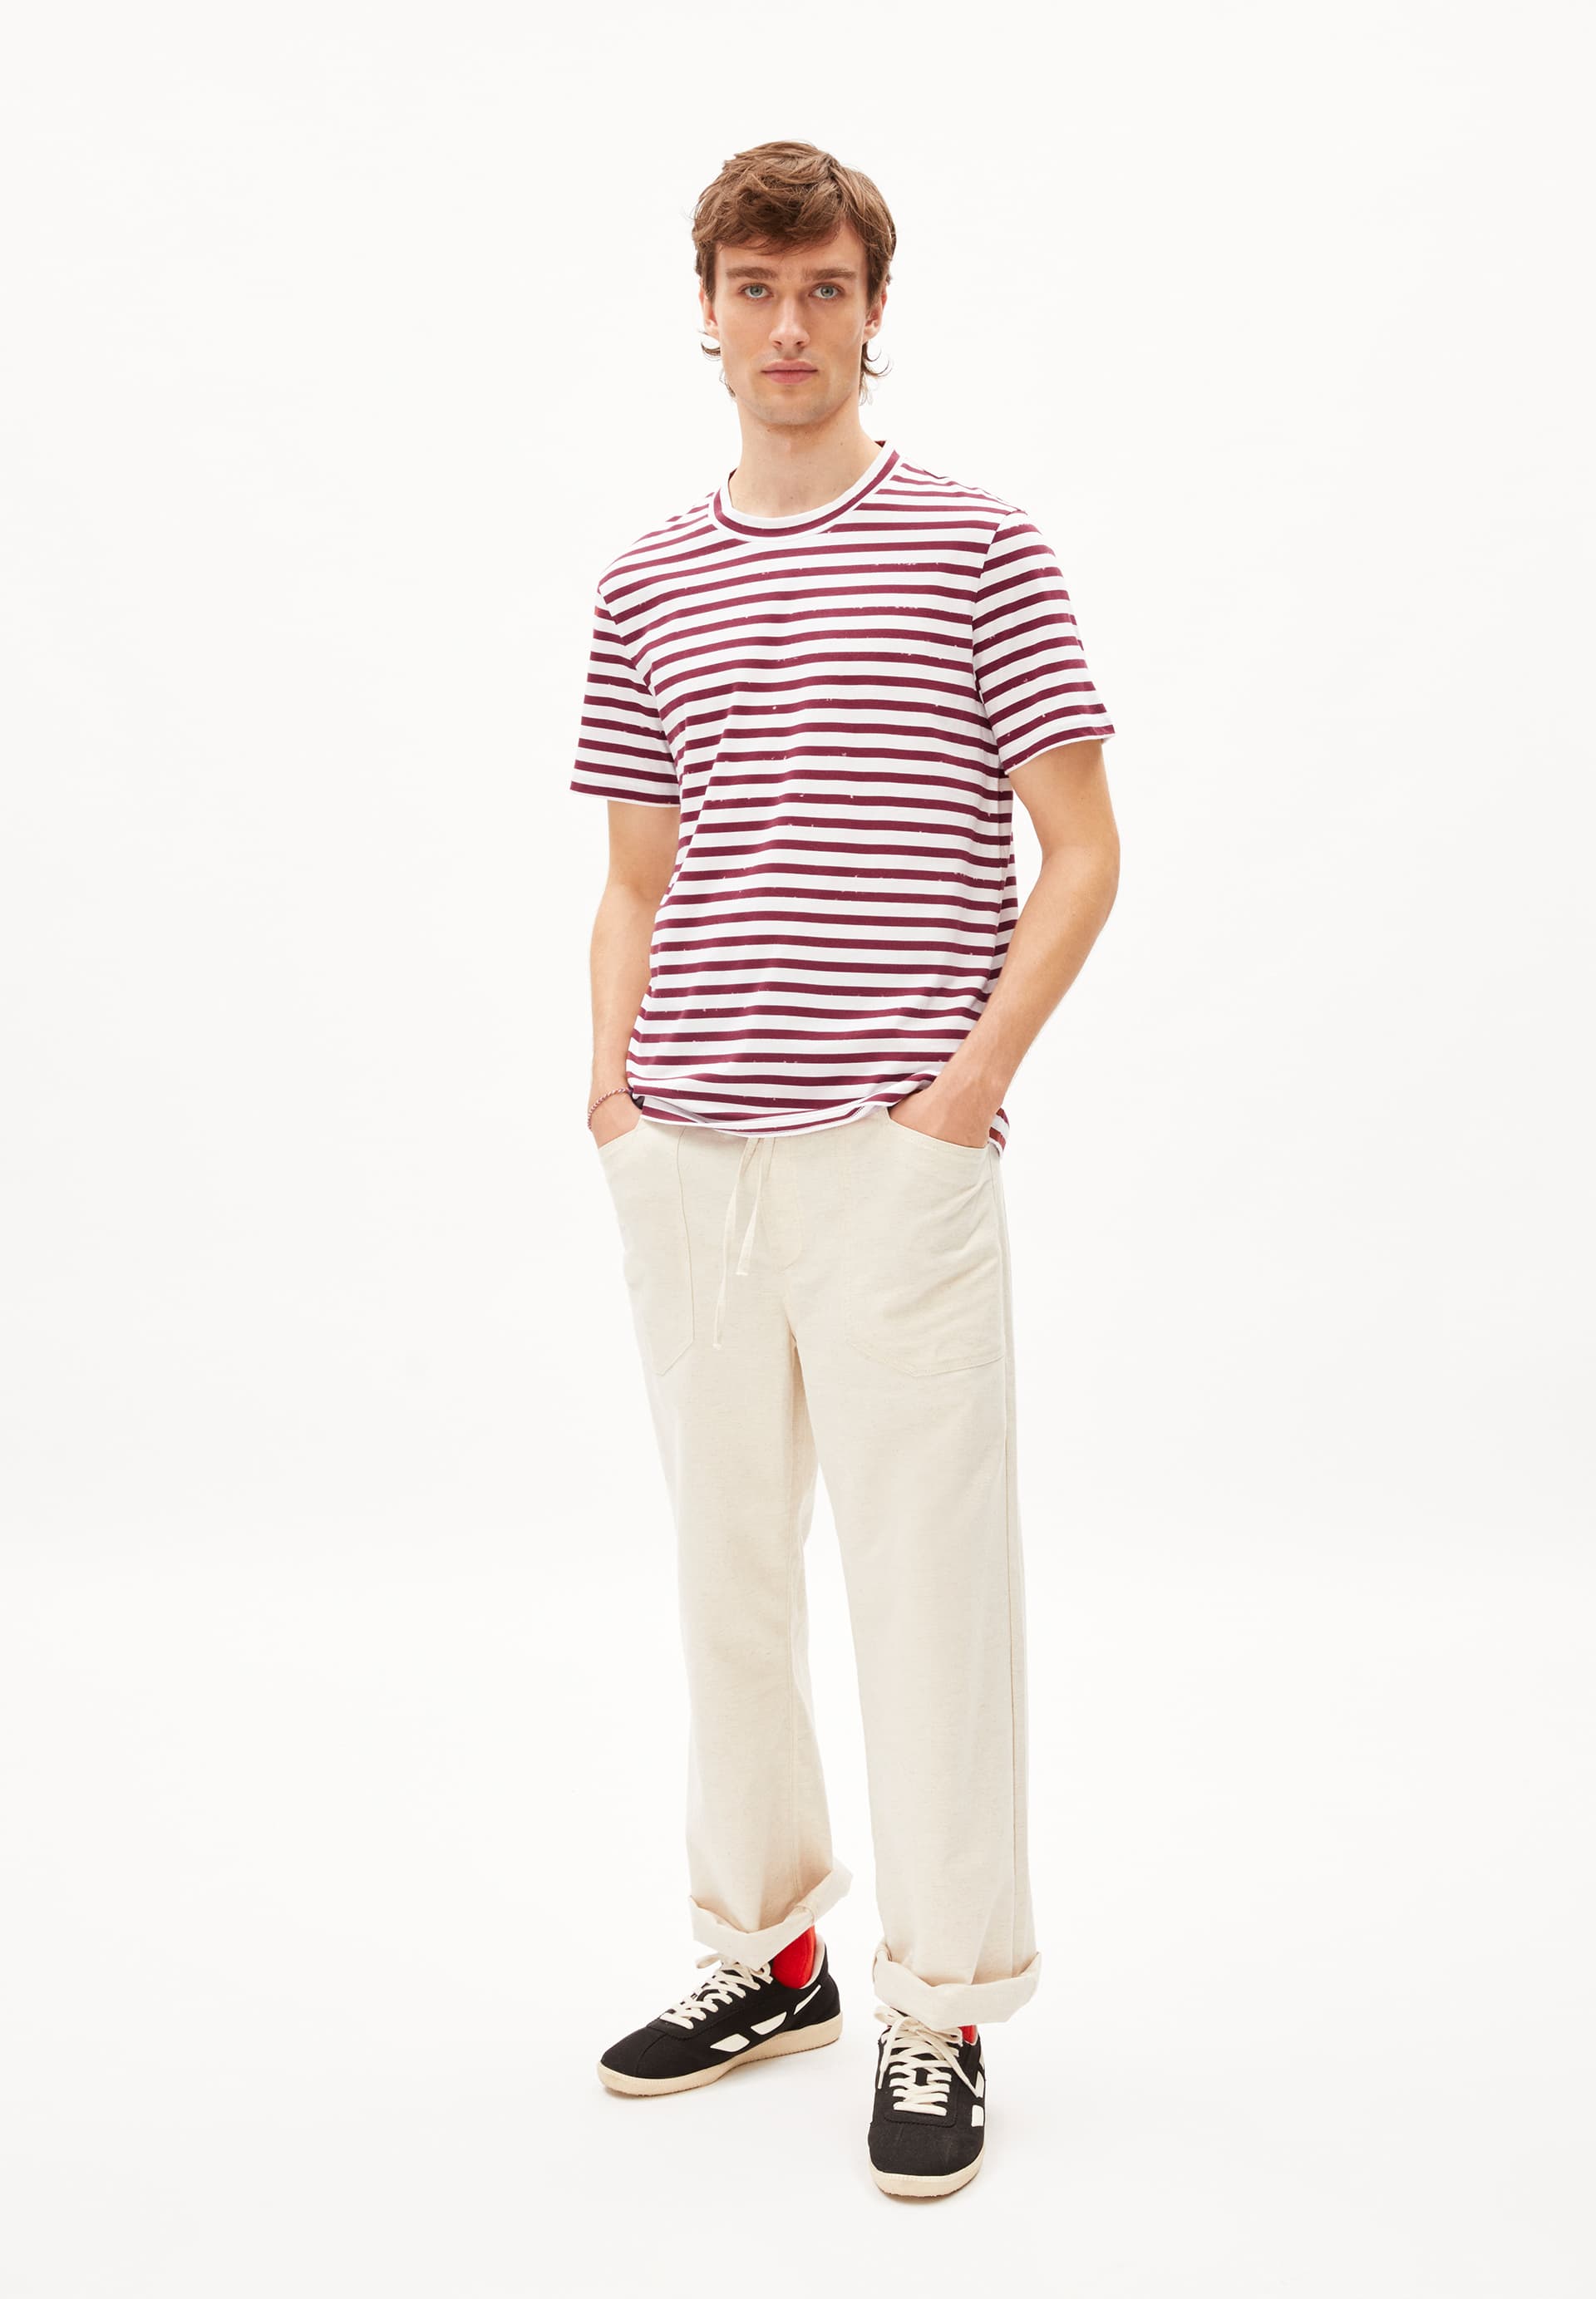 MALMAA STRIPES T-Shirt Relaxed Fit made of Organic Cotton